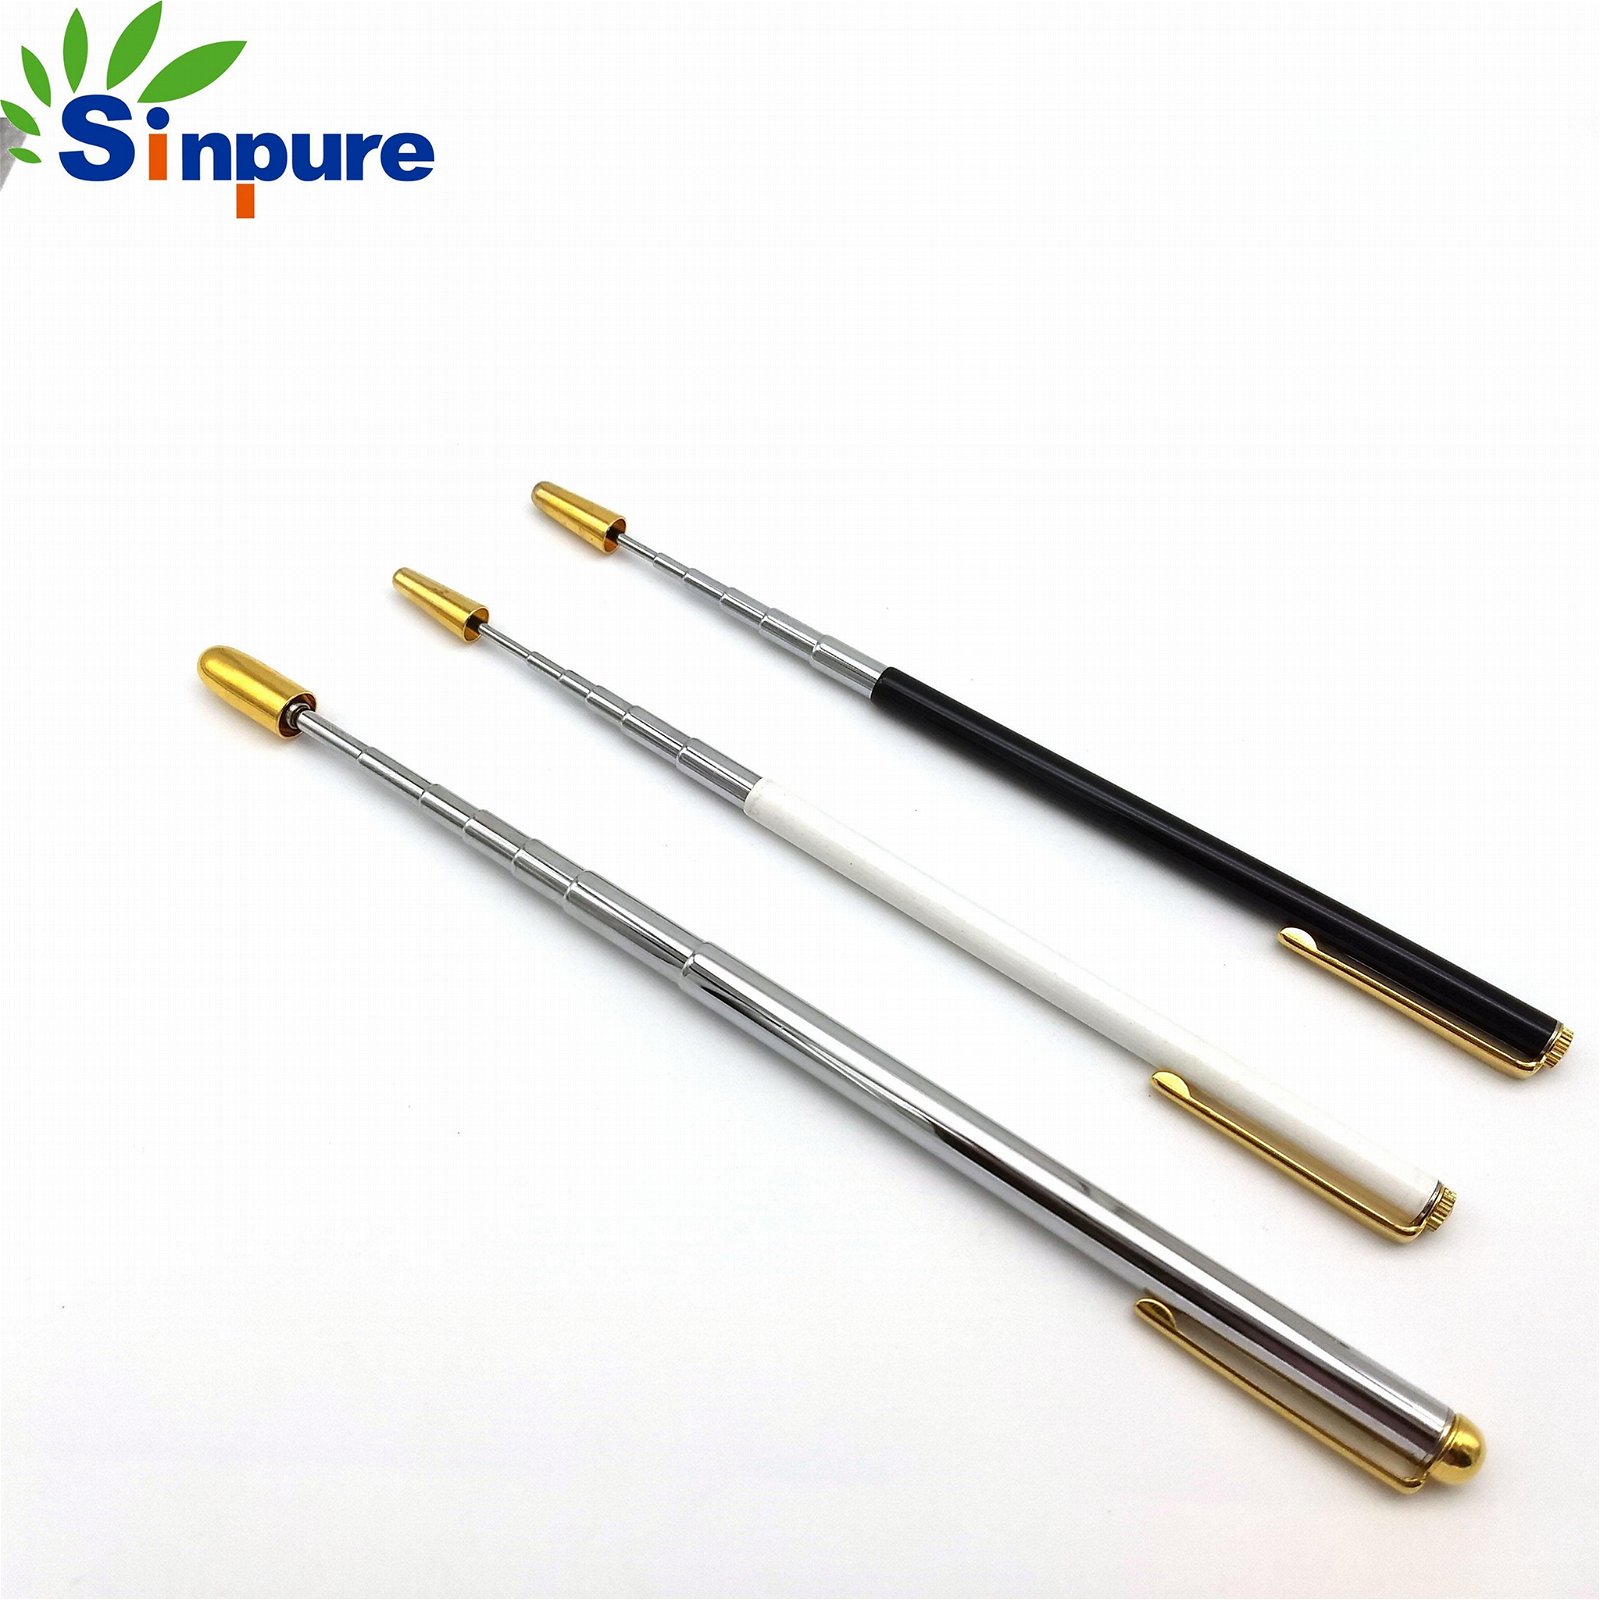 China Suppliers Customized Stainless Steel Telescopic Pole with Thread Part 4